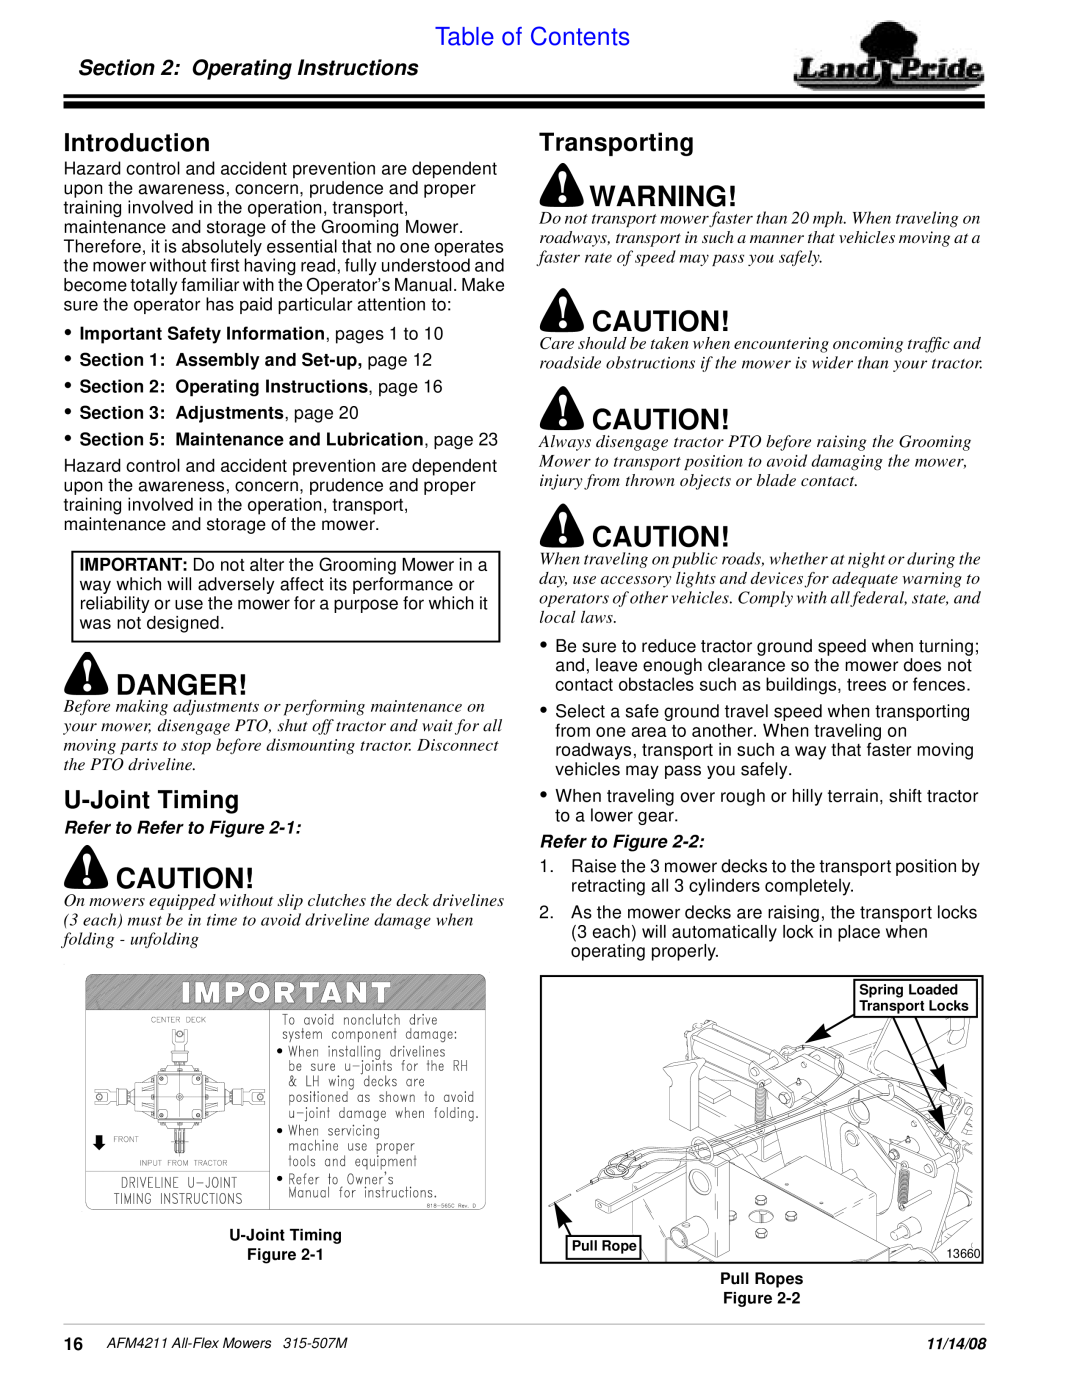 Land Pride AFM4211 Introduction, U-Joint Timing, Transporting, Operating Instructions, Assembly and Set-up, page, Danger 